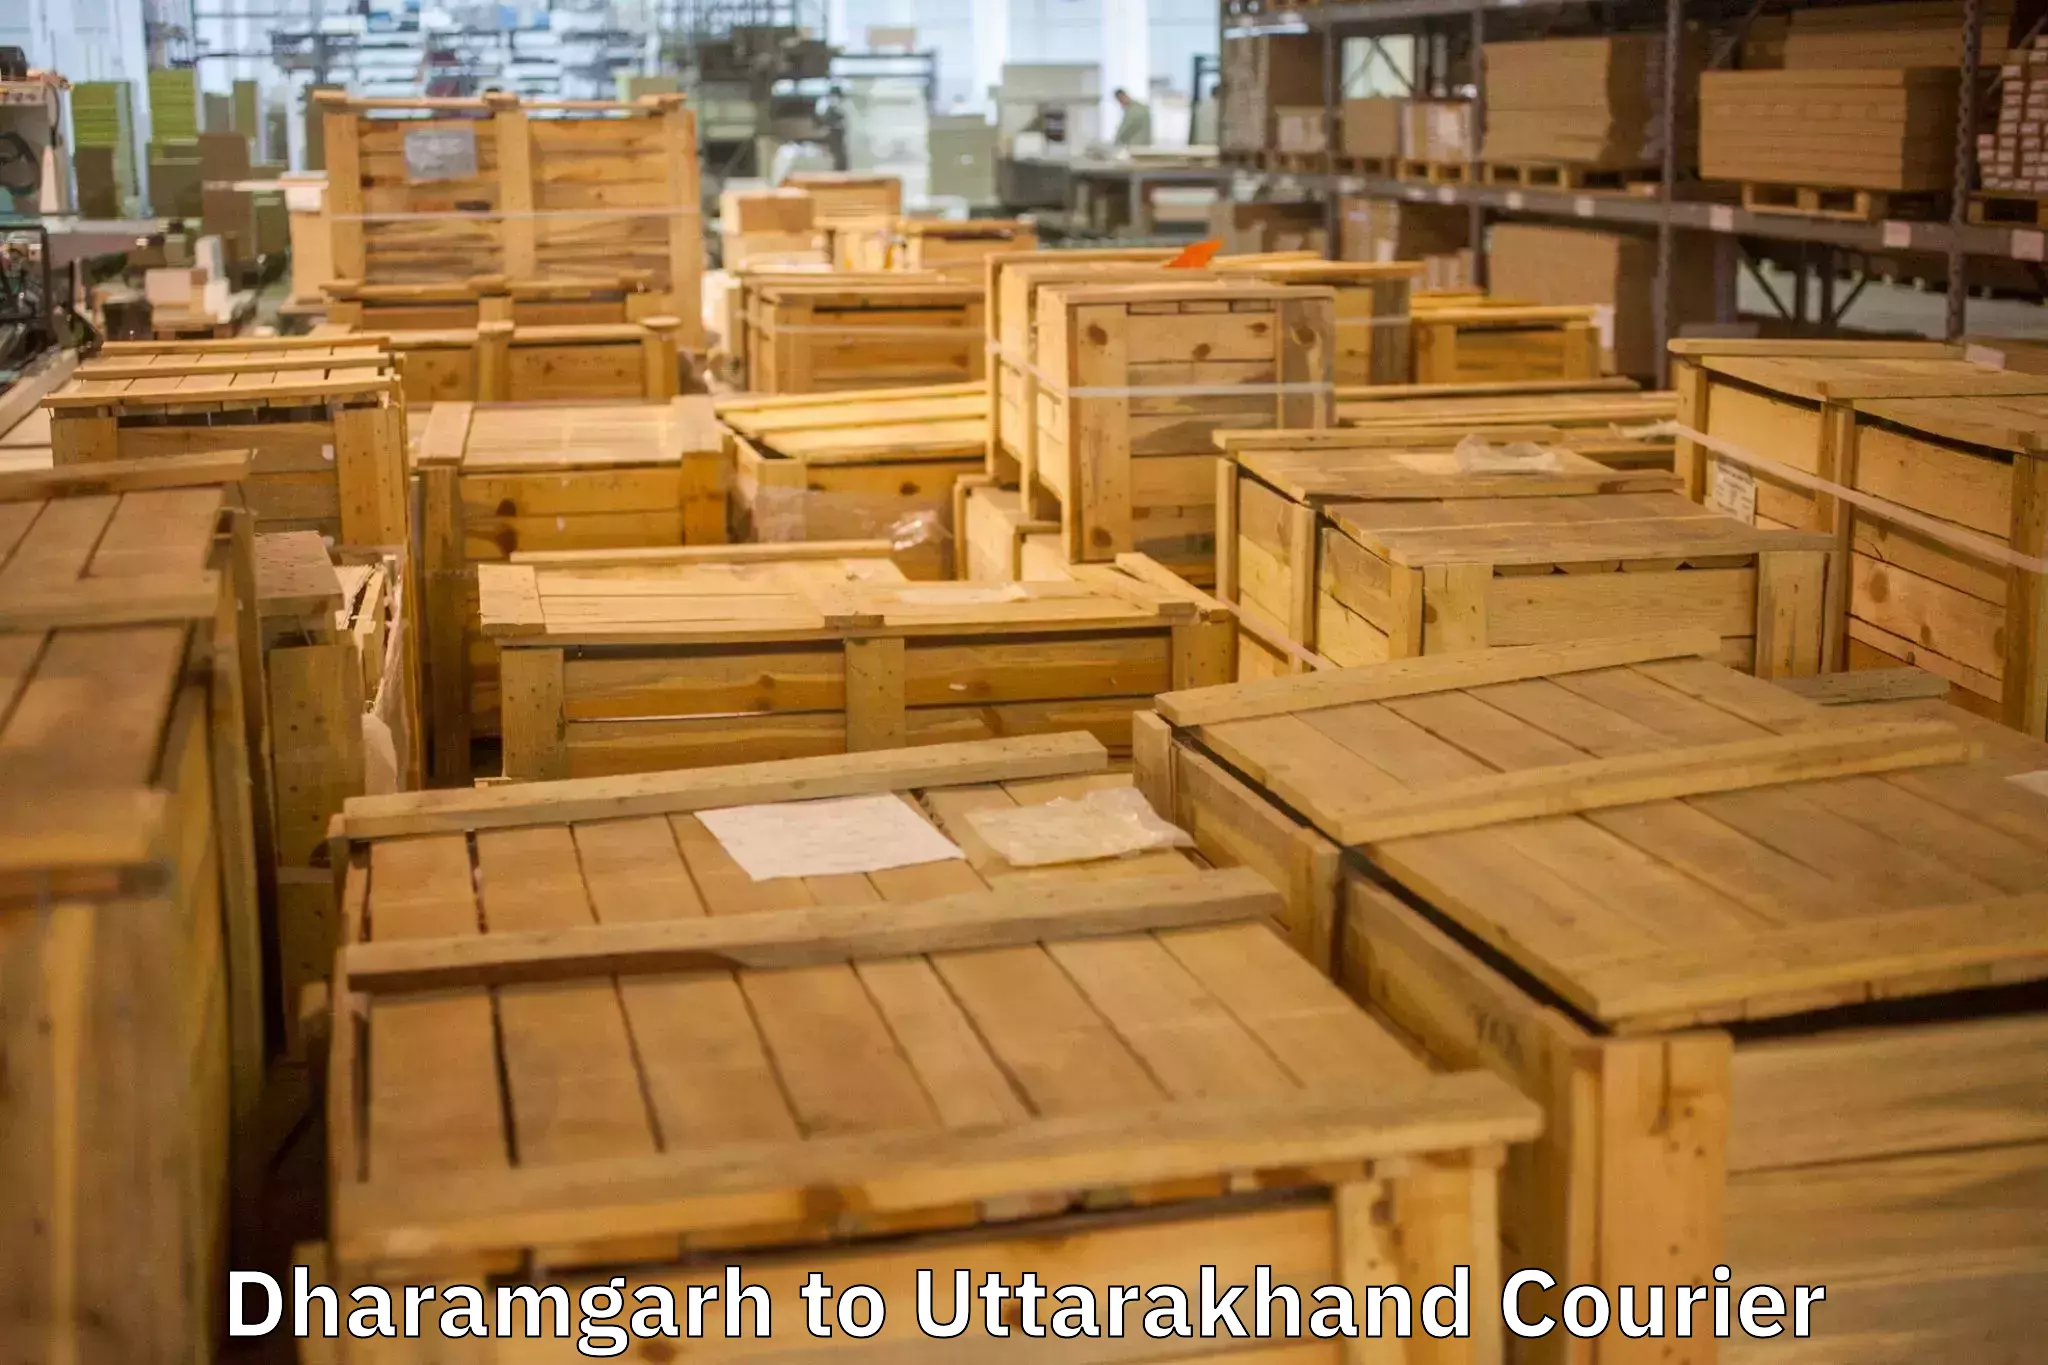 Furniture transport company Dharamgarh to Rudrapur